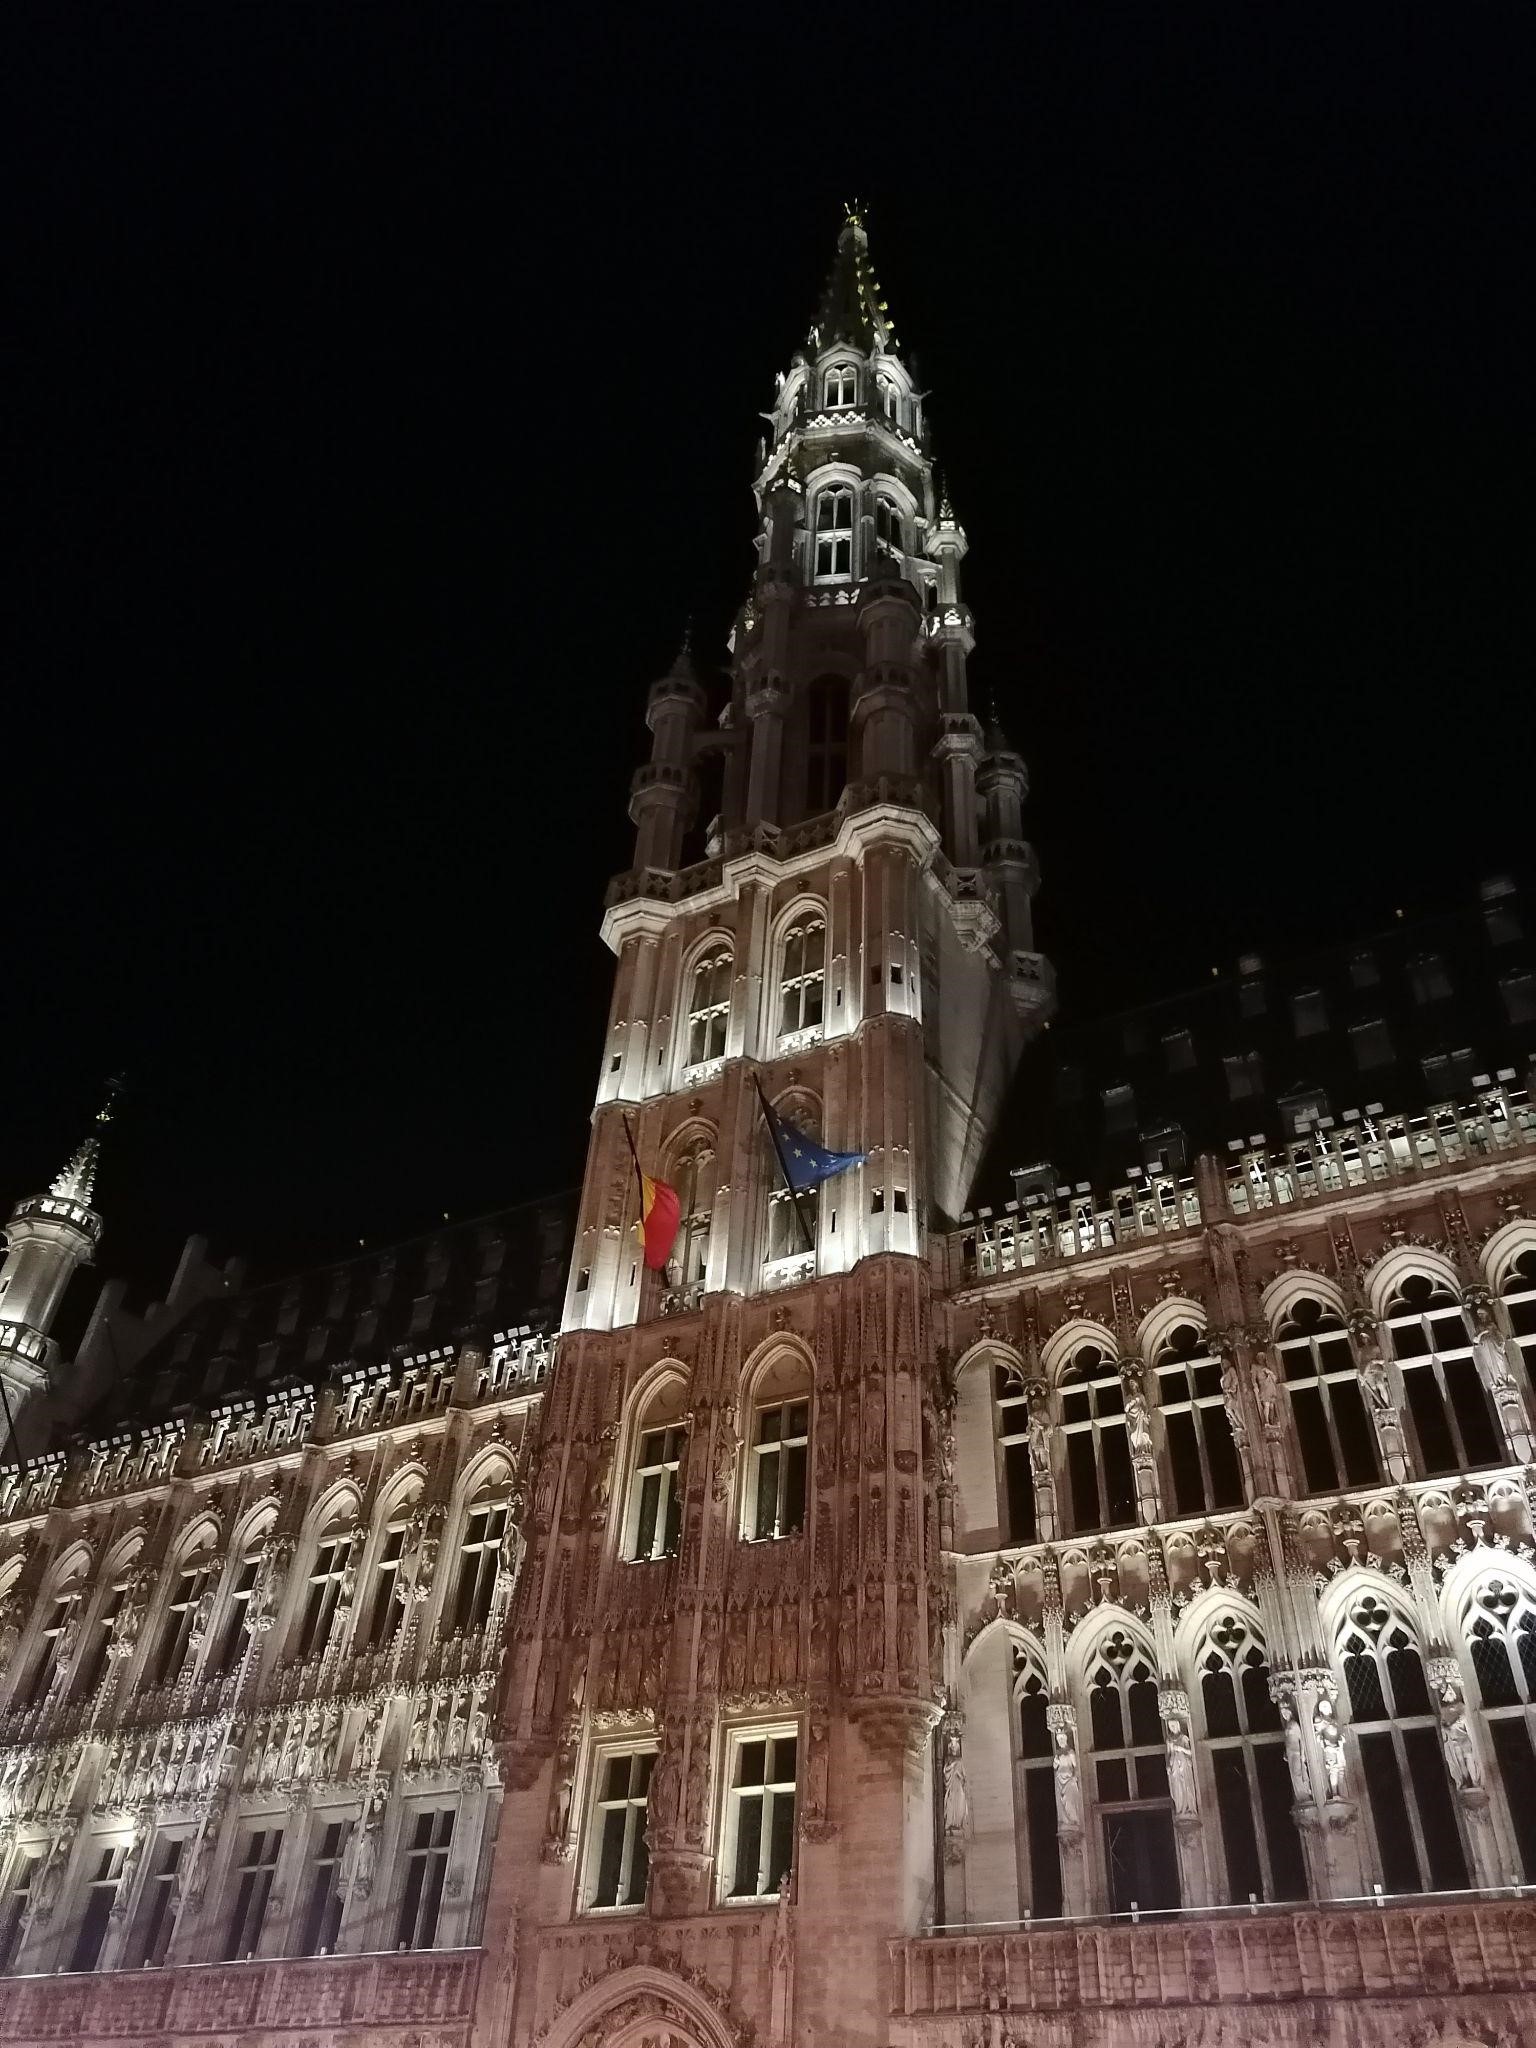 The Belgian flag and the flag of the European Union waving from the town hall at Grand Place, Brussels.